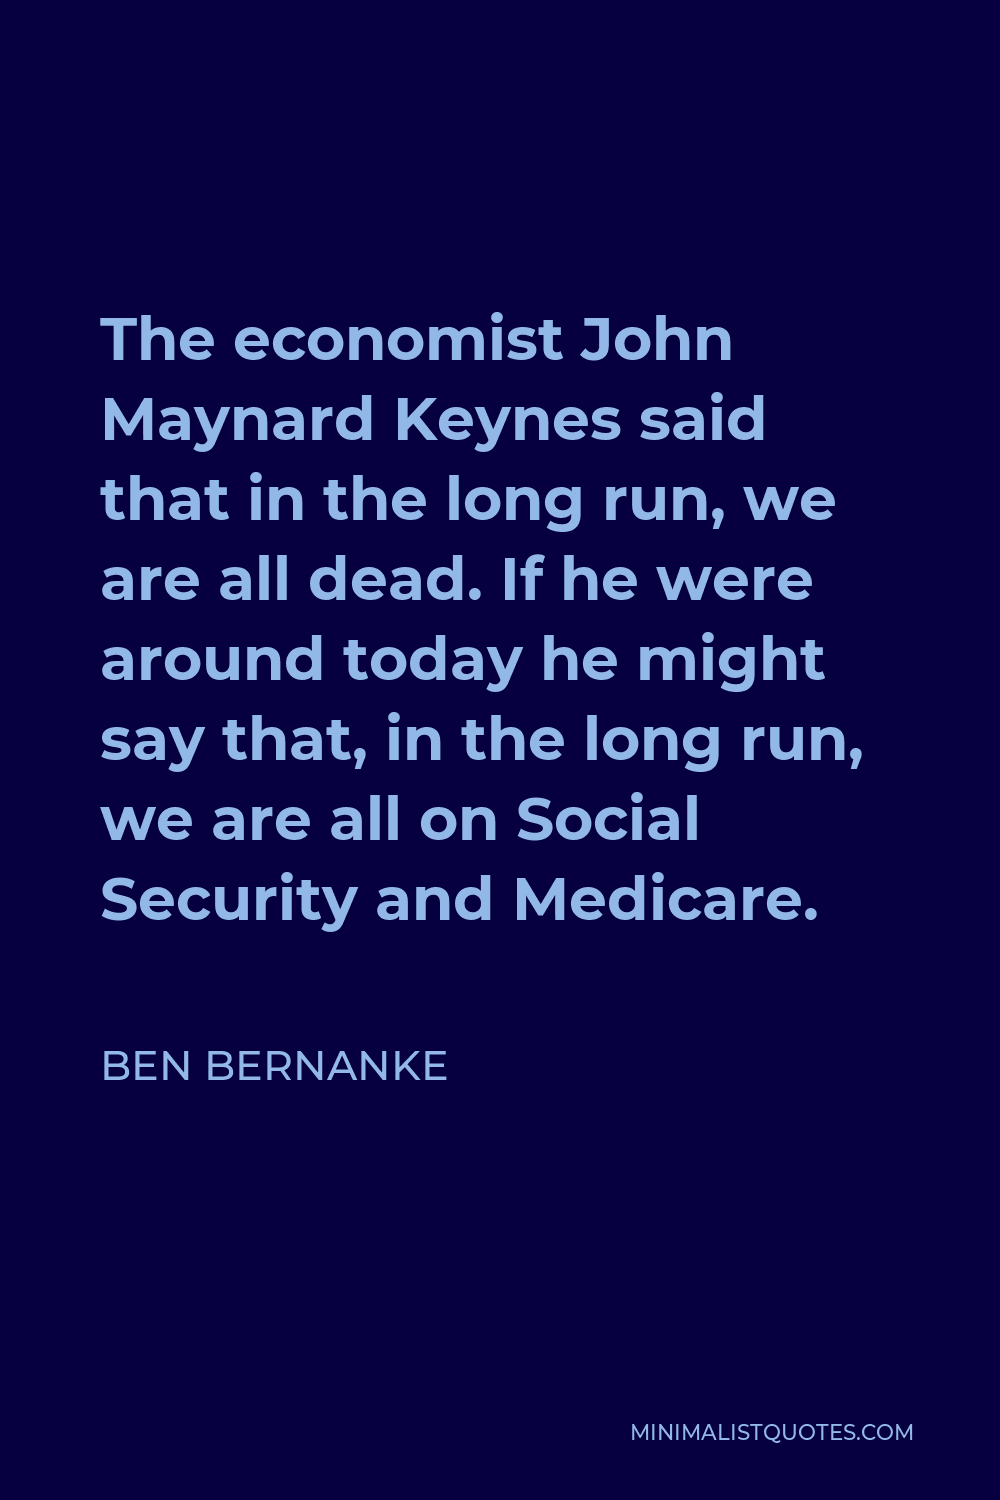 Ben Bernanke Quote - The economist John Maynard Keynes said that in the long run, we are all dead. If he were around today he might say that, in the long run, we are all on Social Security and Medicare.